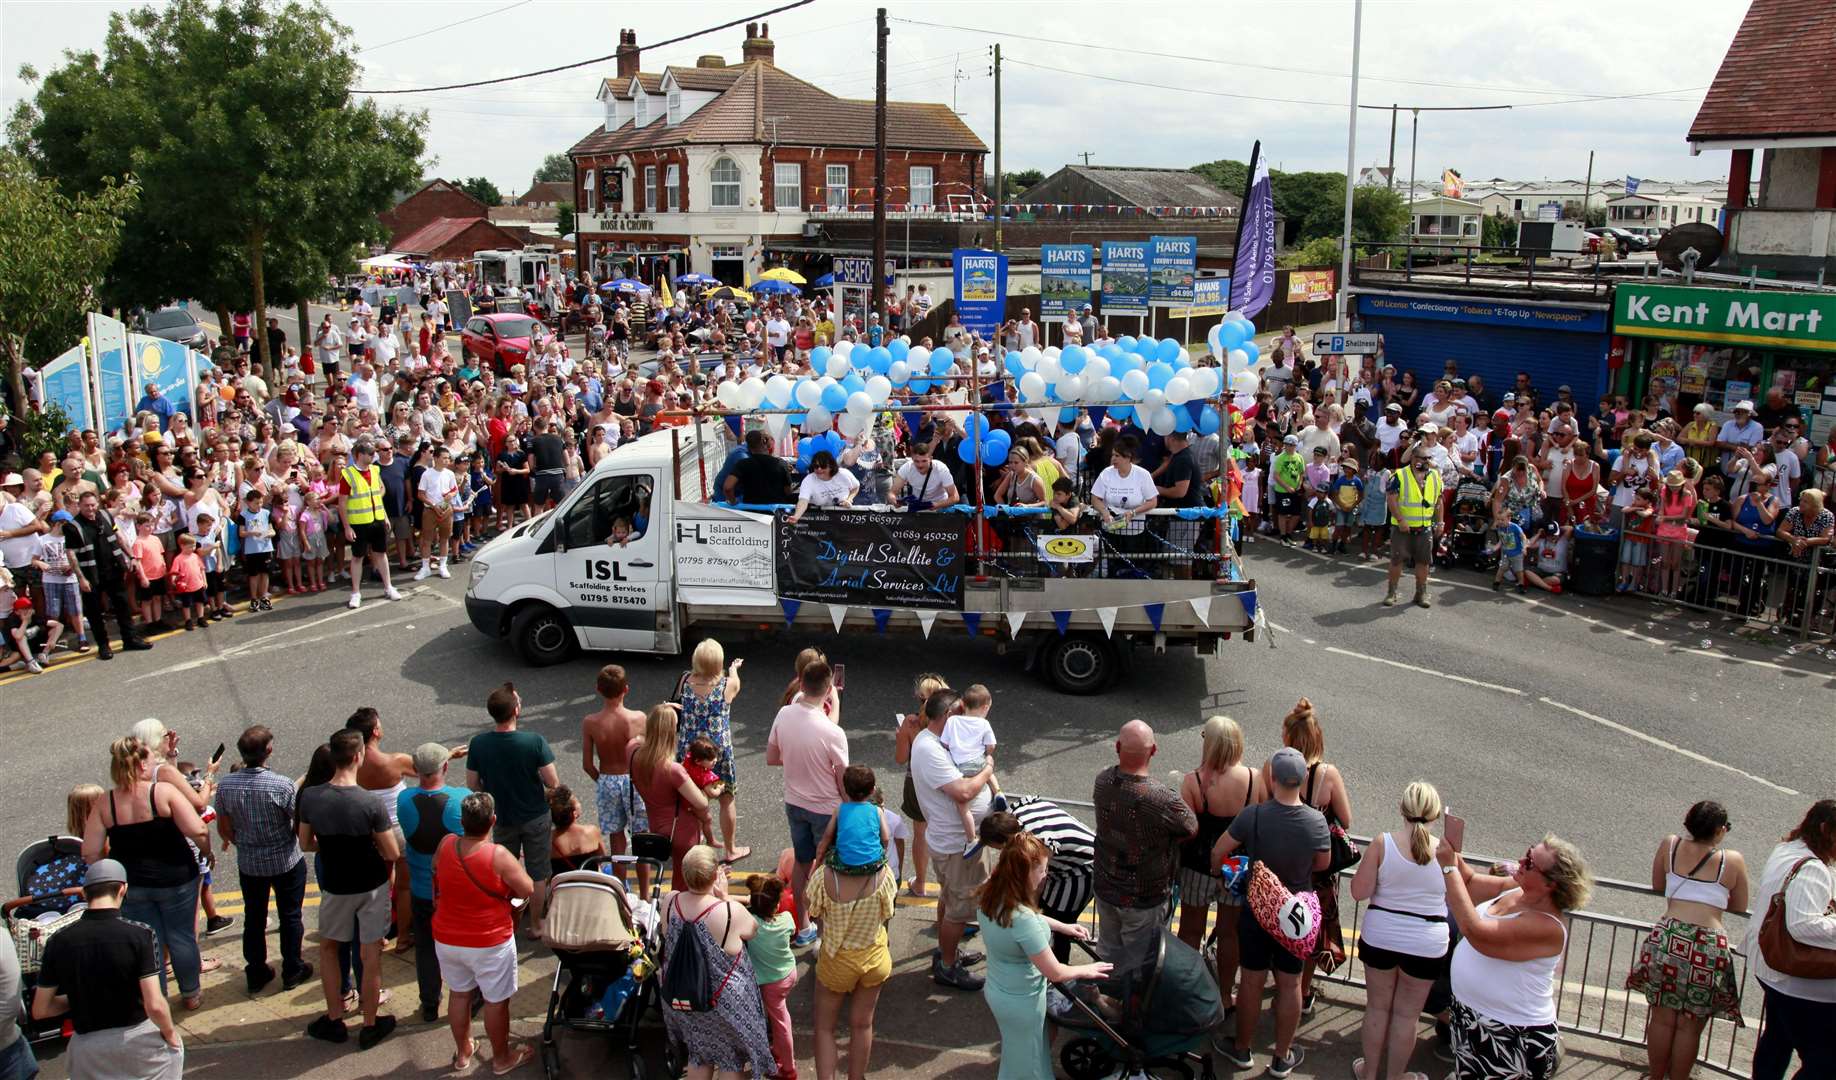 Spectators line the streets for the 2019 Leysdown Carnival. Picture: Sean Aidan